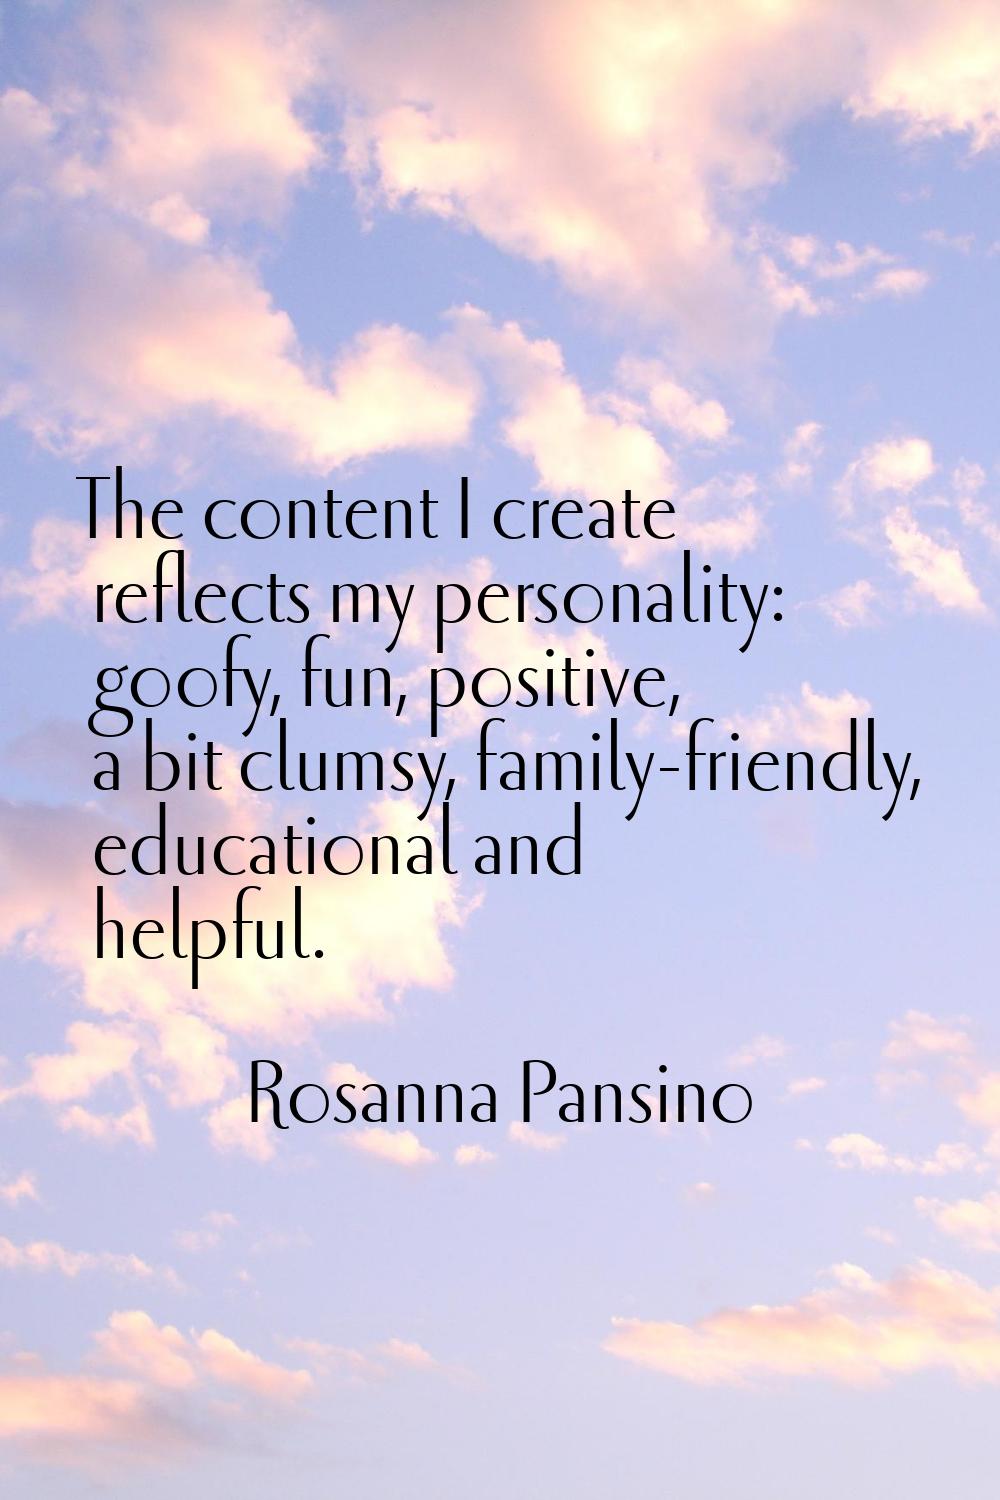 The content I create reflects my personality: goofy, fun, positive, a bit clumsy, family-friendly, 